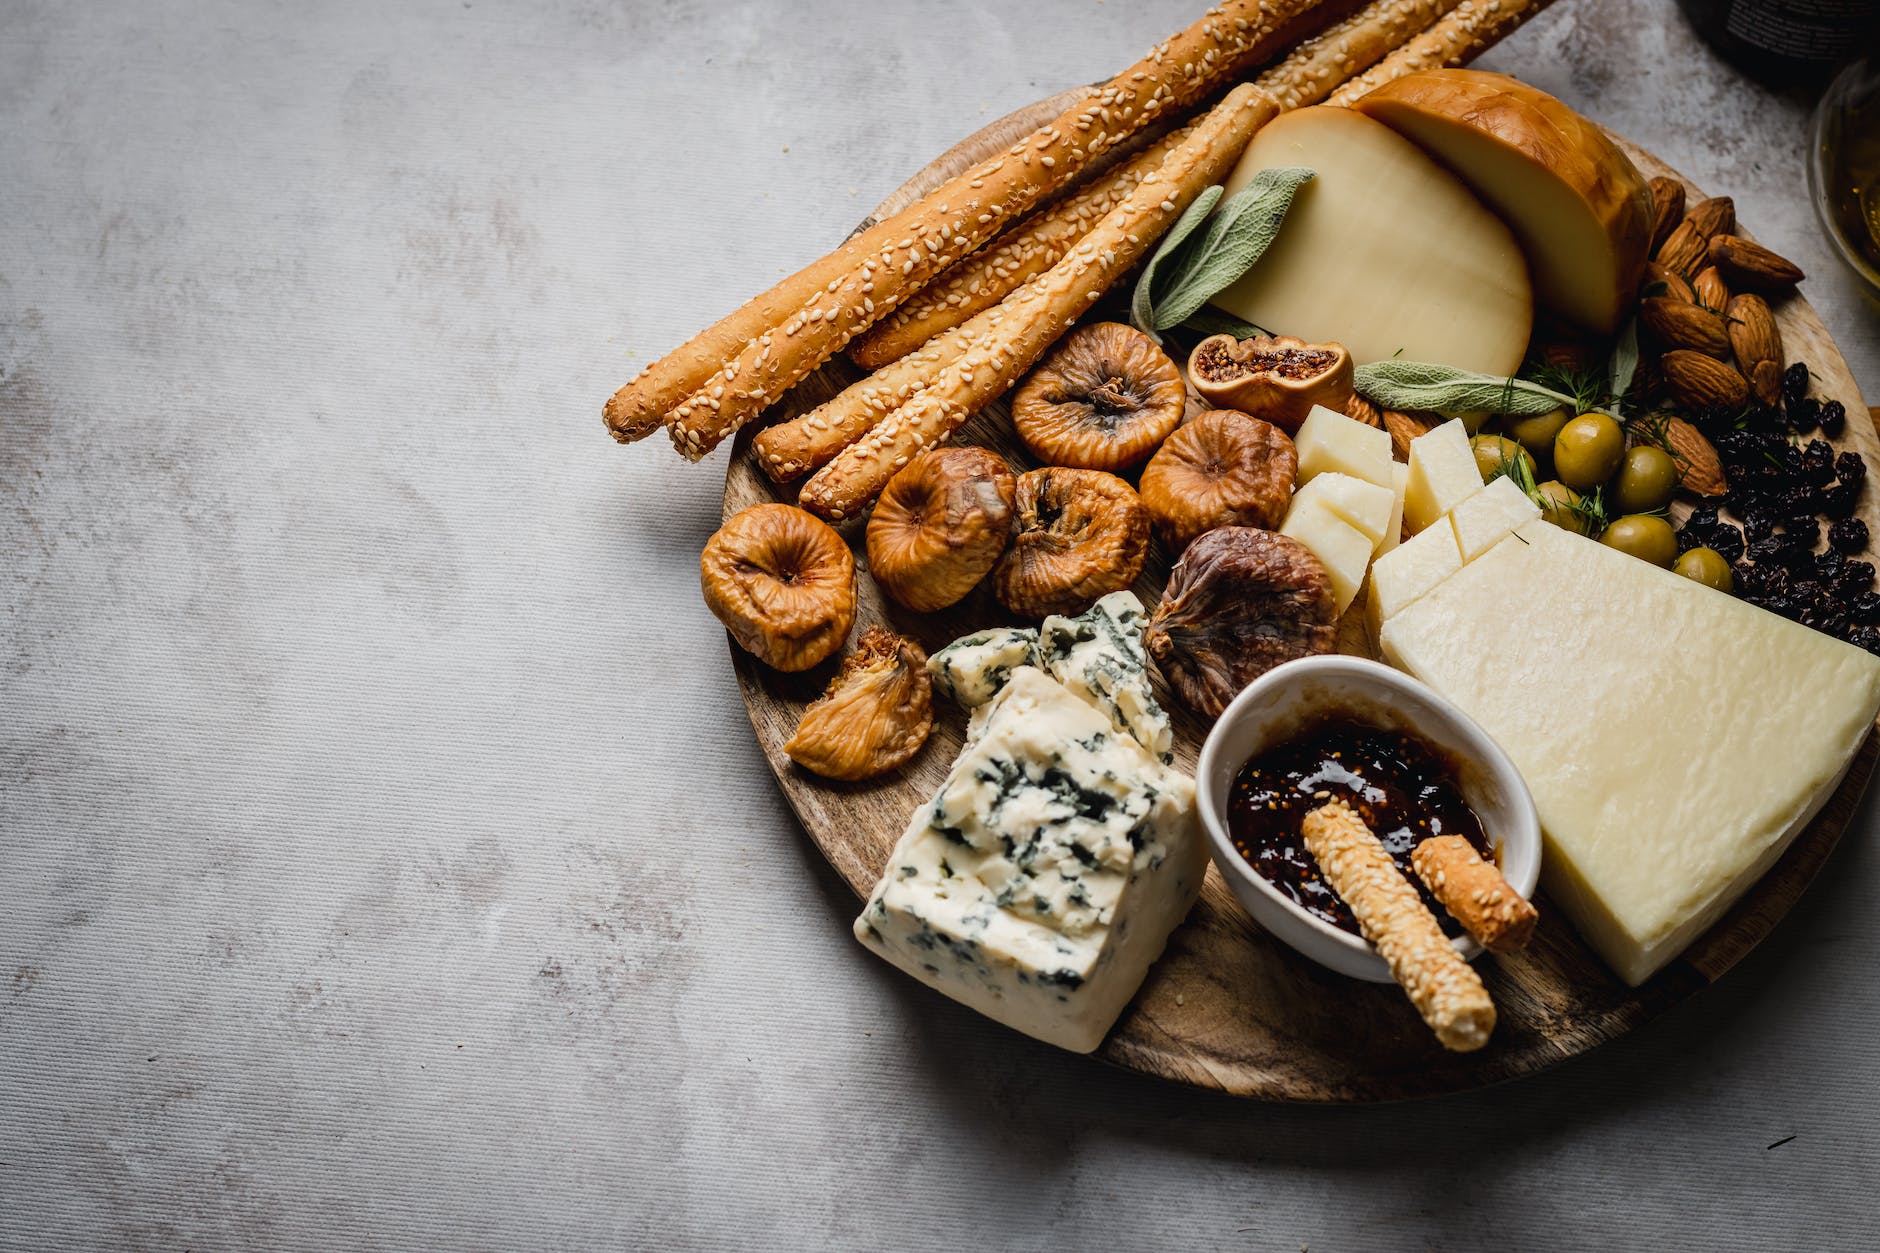 assorted cheese and nuts on the wooden platter